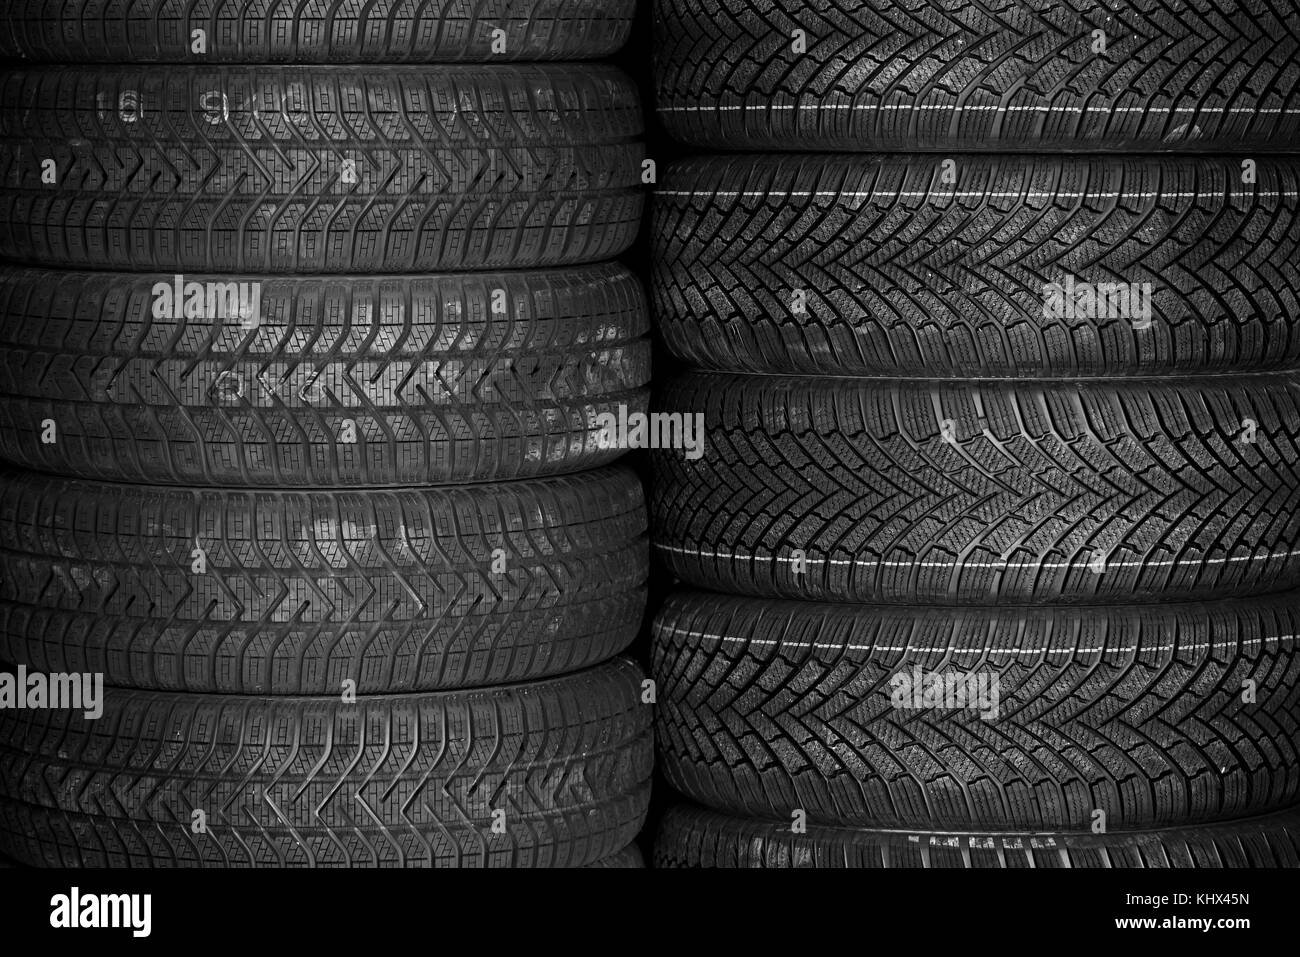 Tires for sale at a tire store - stacks of tires Stock Photo